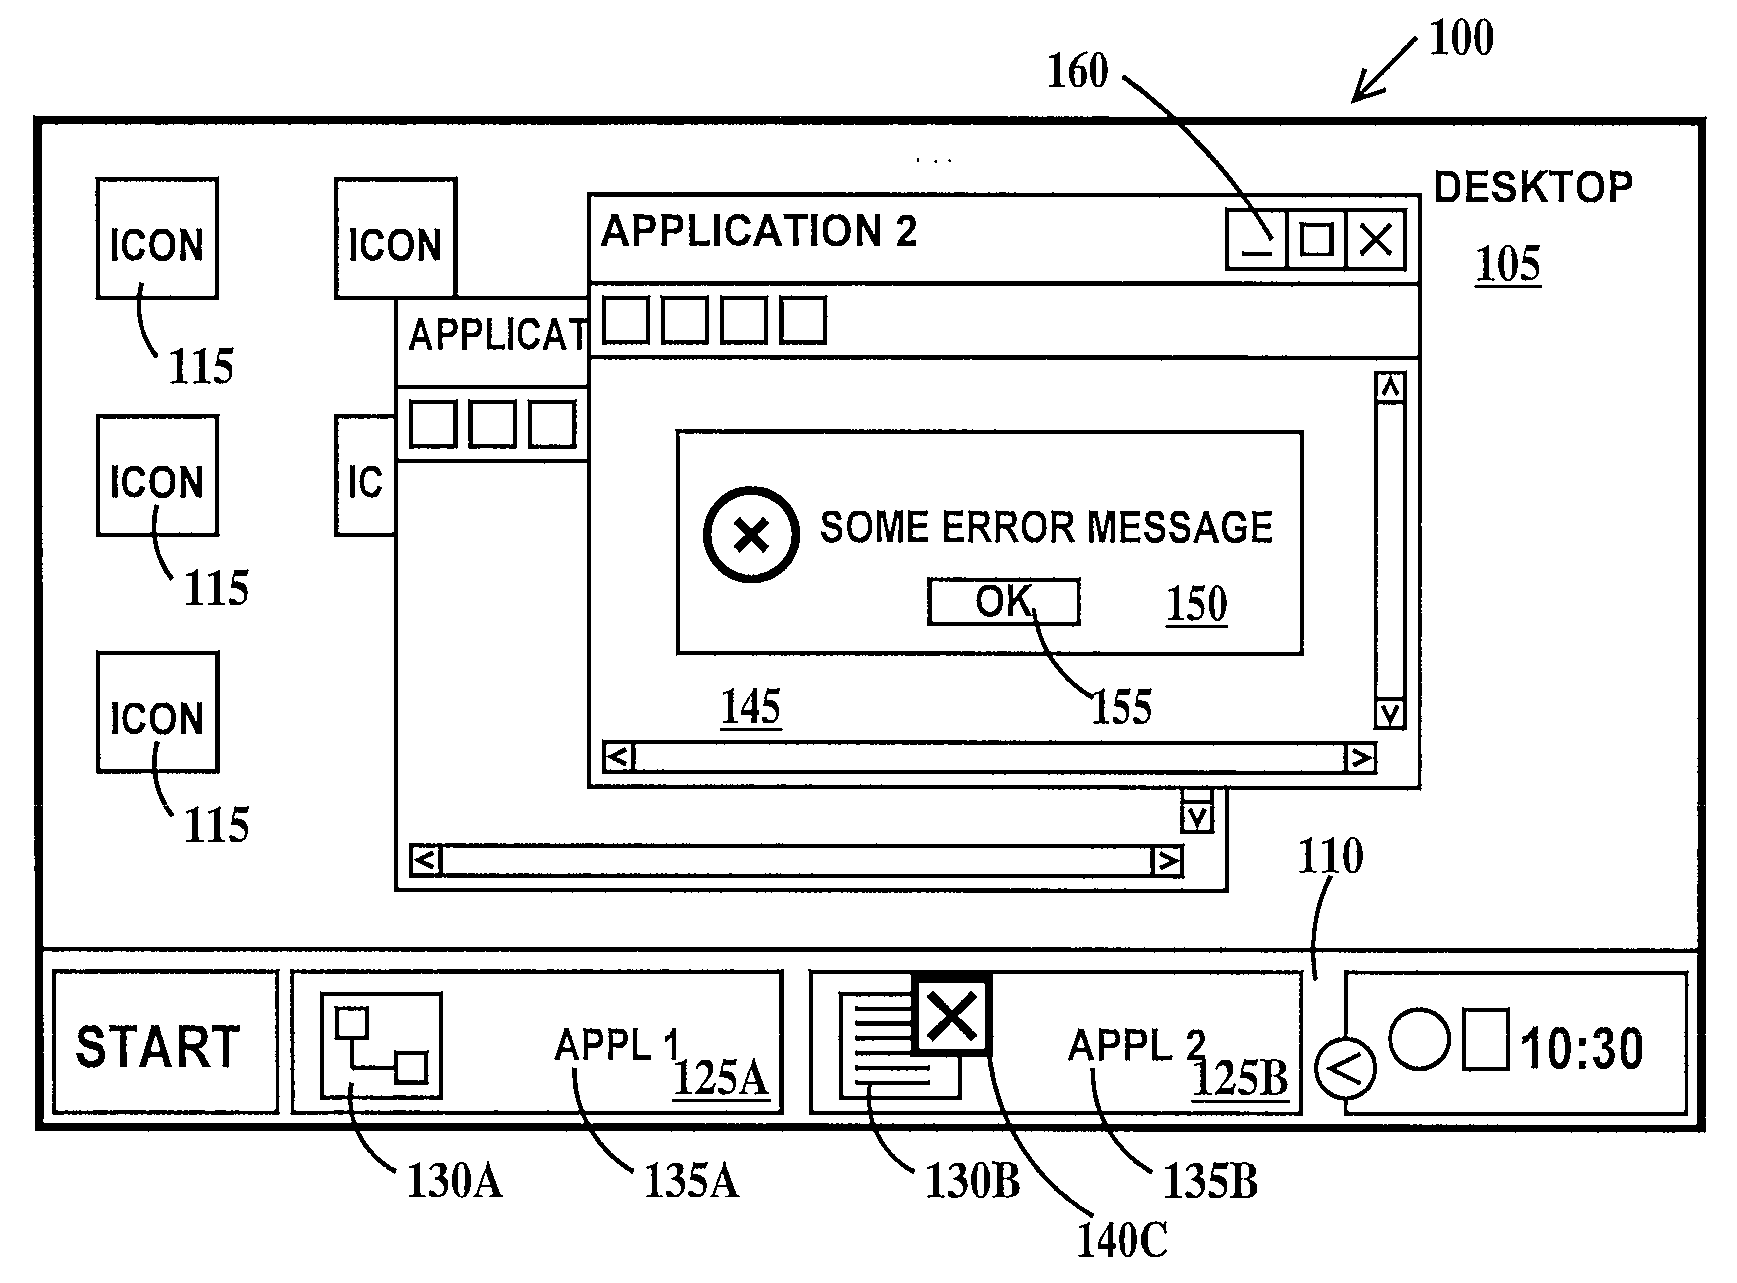 Notification of state transition of an out-of-focus application